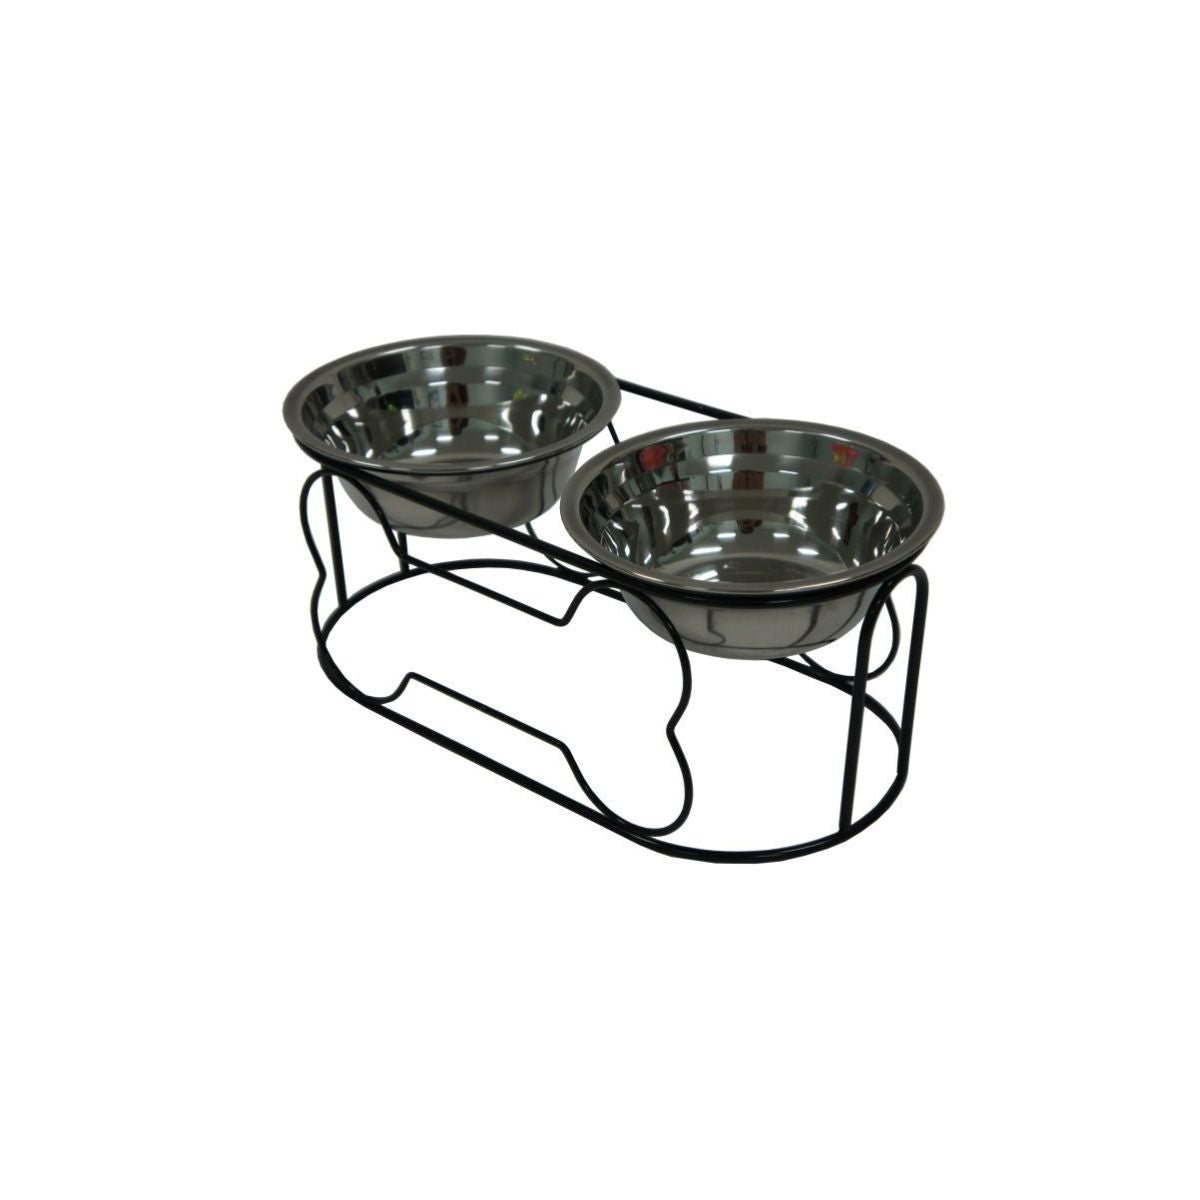 YML Dog Water Bowl & Food Bowl with Iron Stand